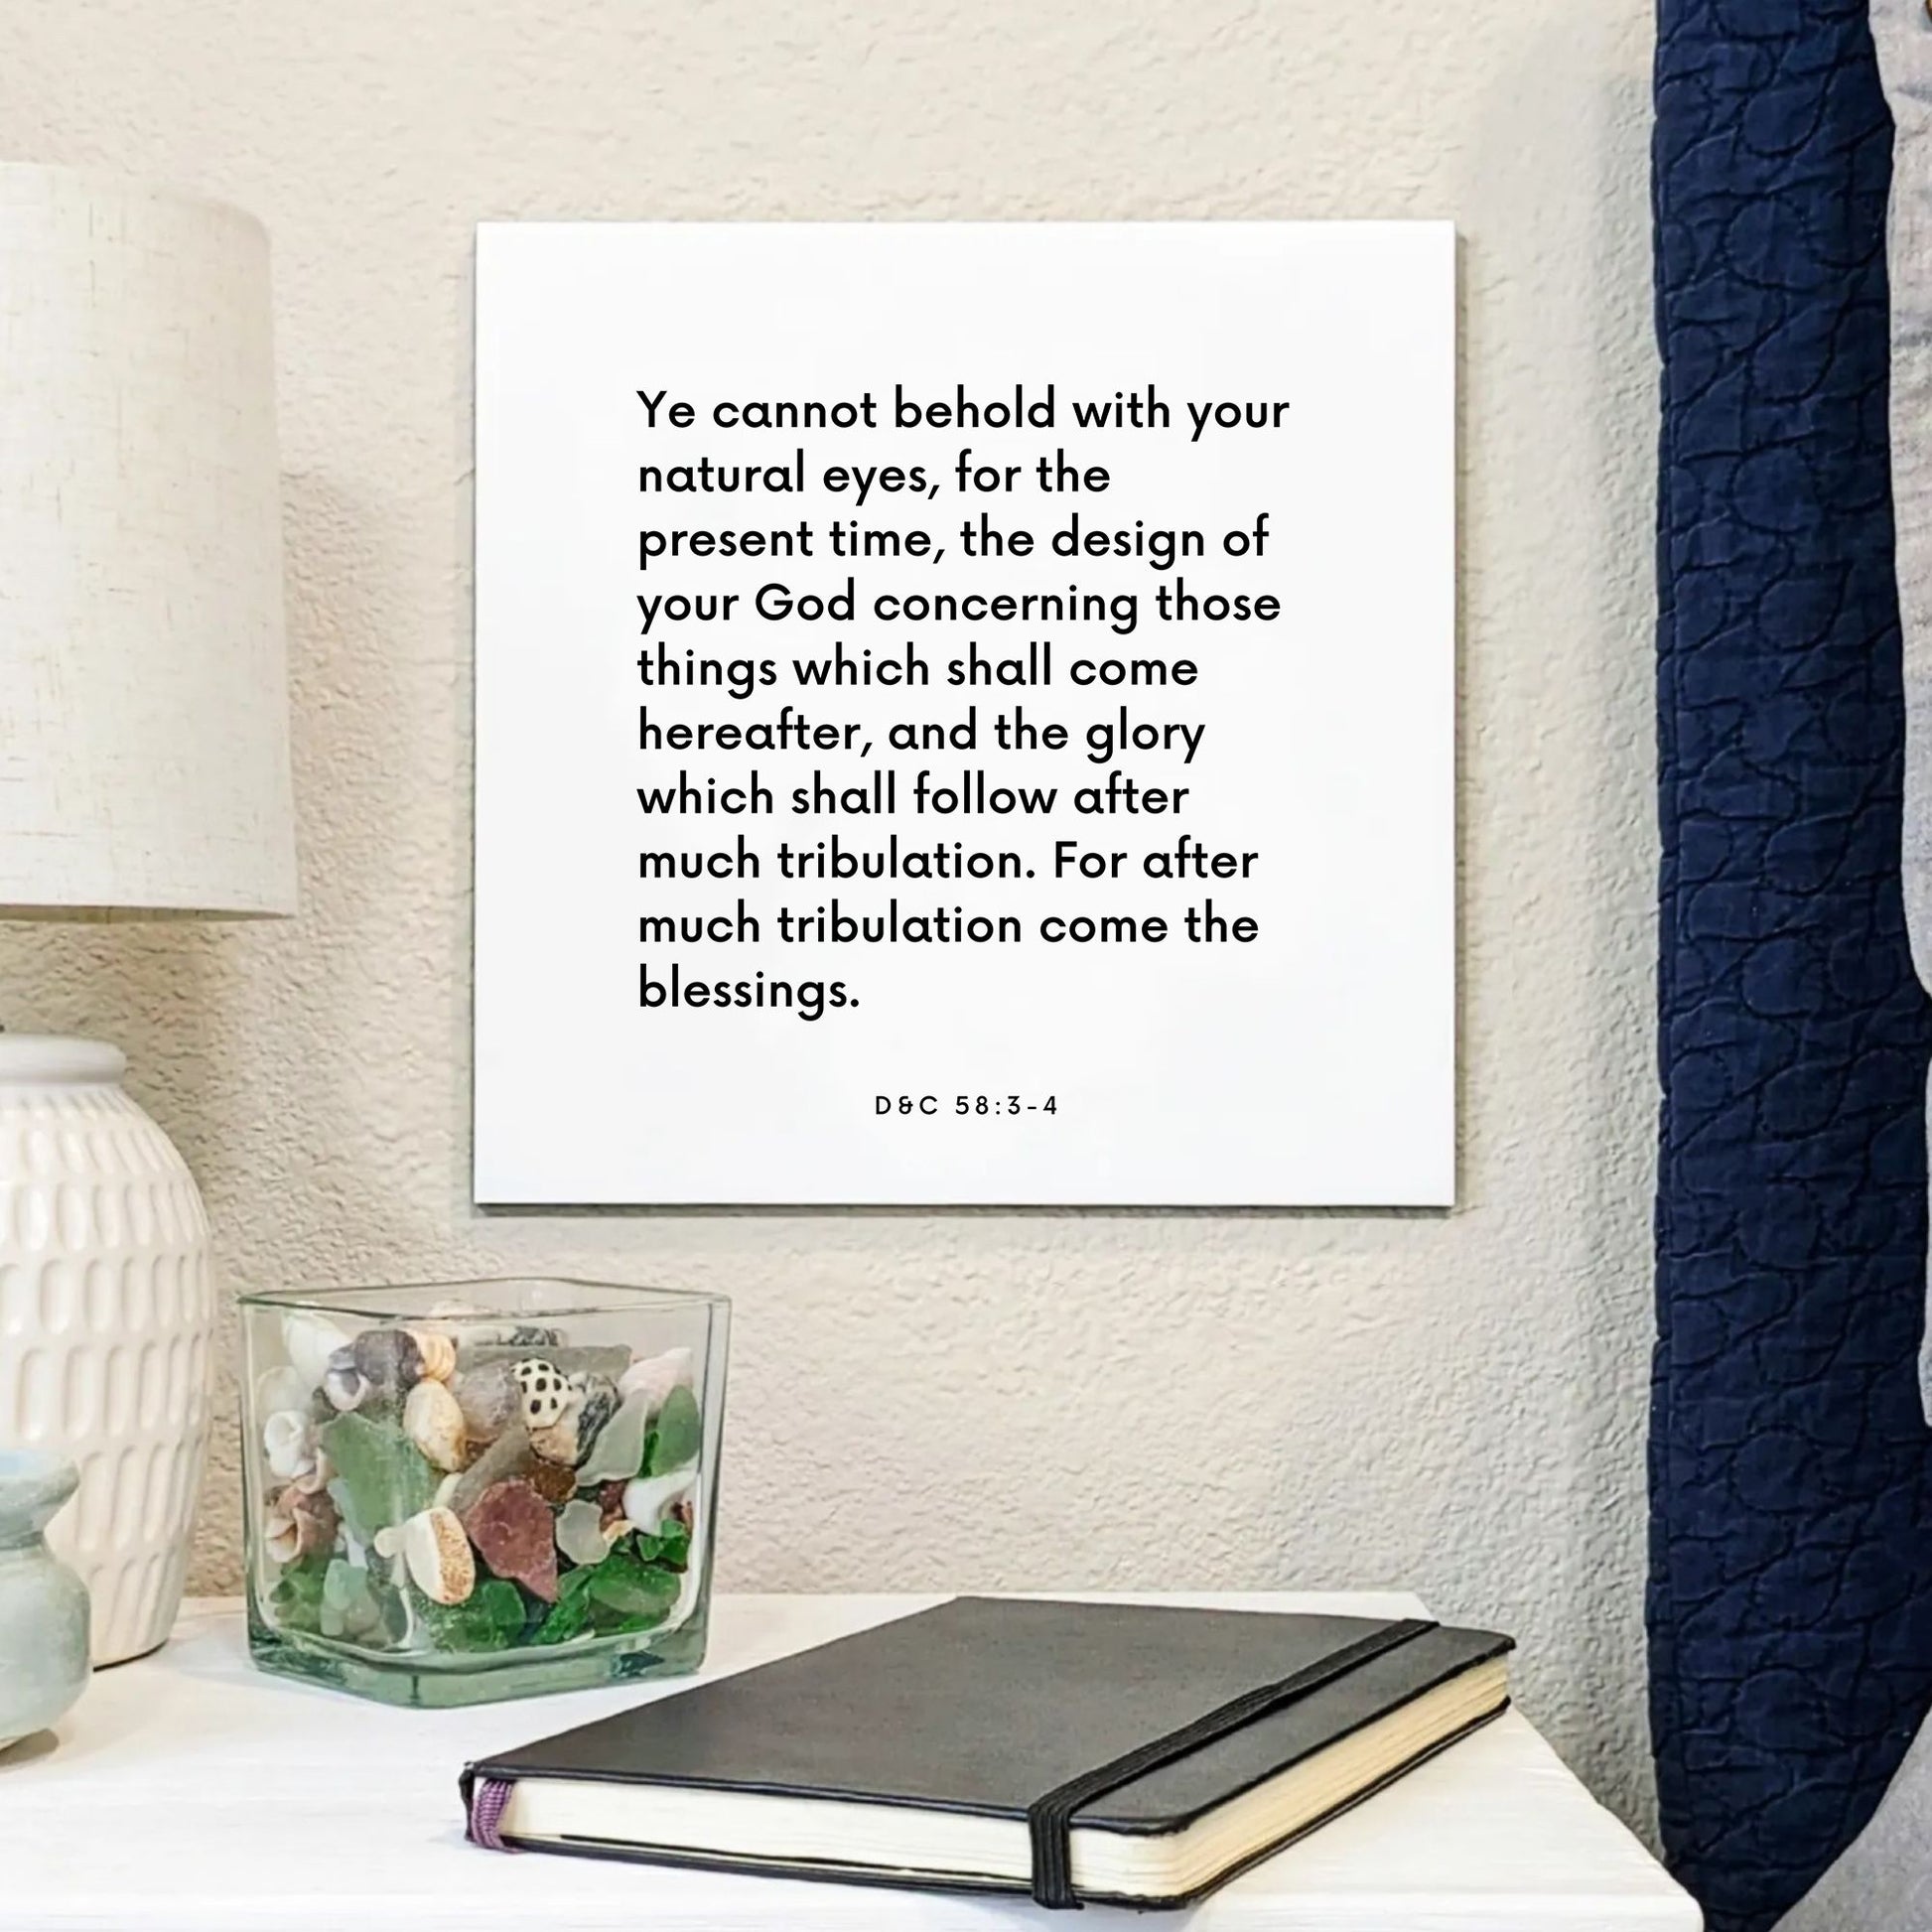 Bedside mouting of the scripture tile for D&C 58:3-4 - "Ye cannot behold with your natural eyes"